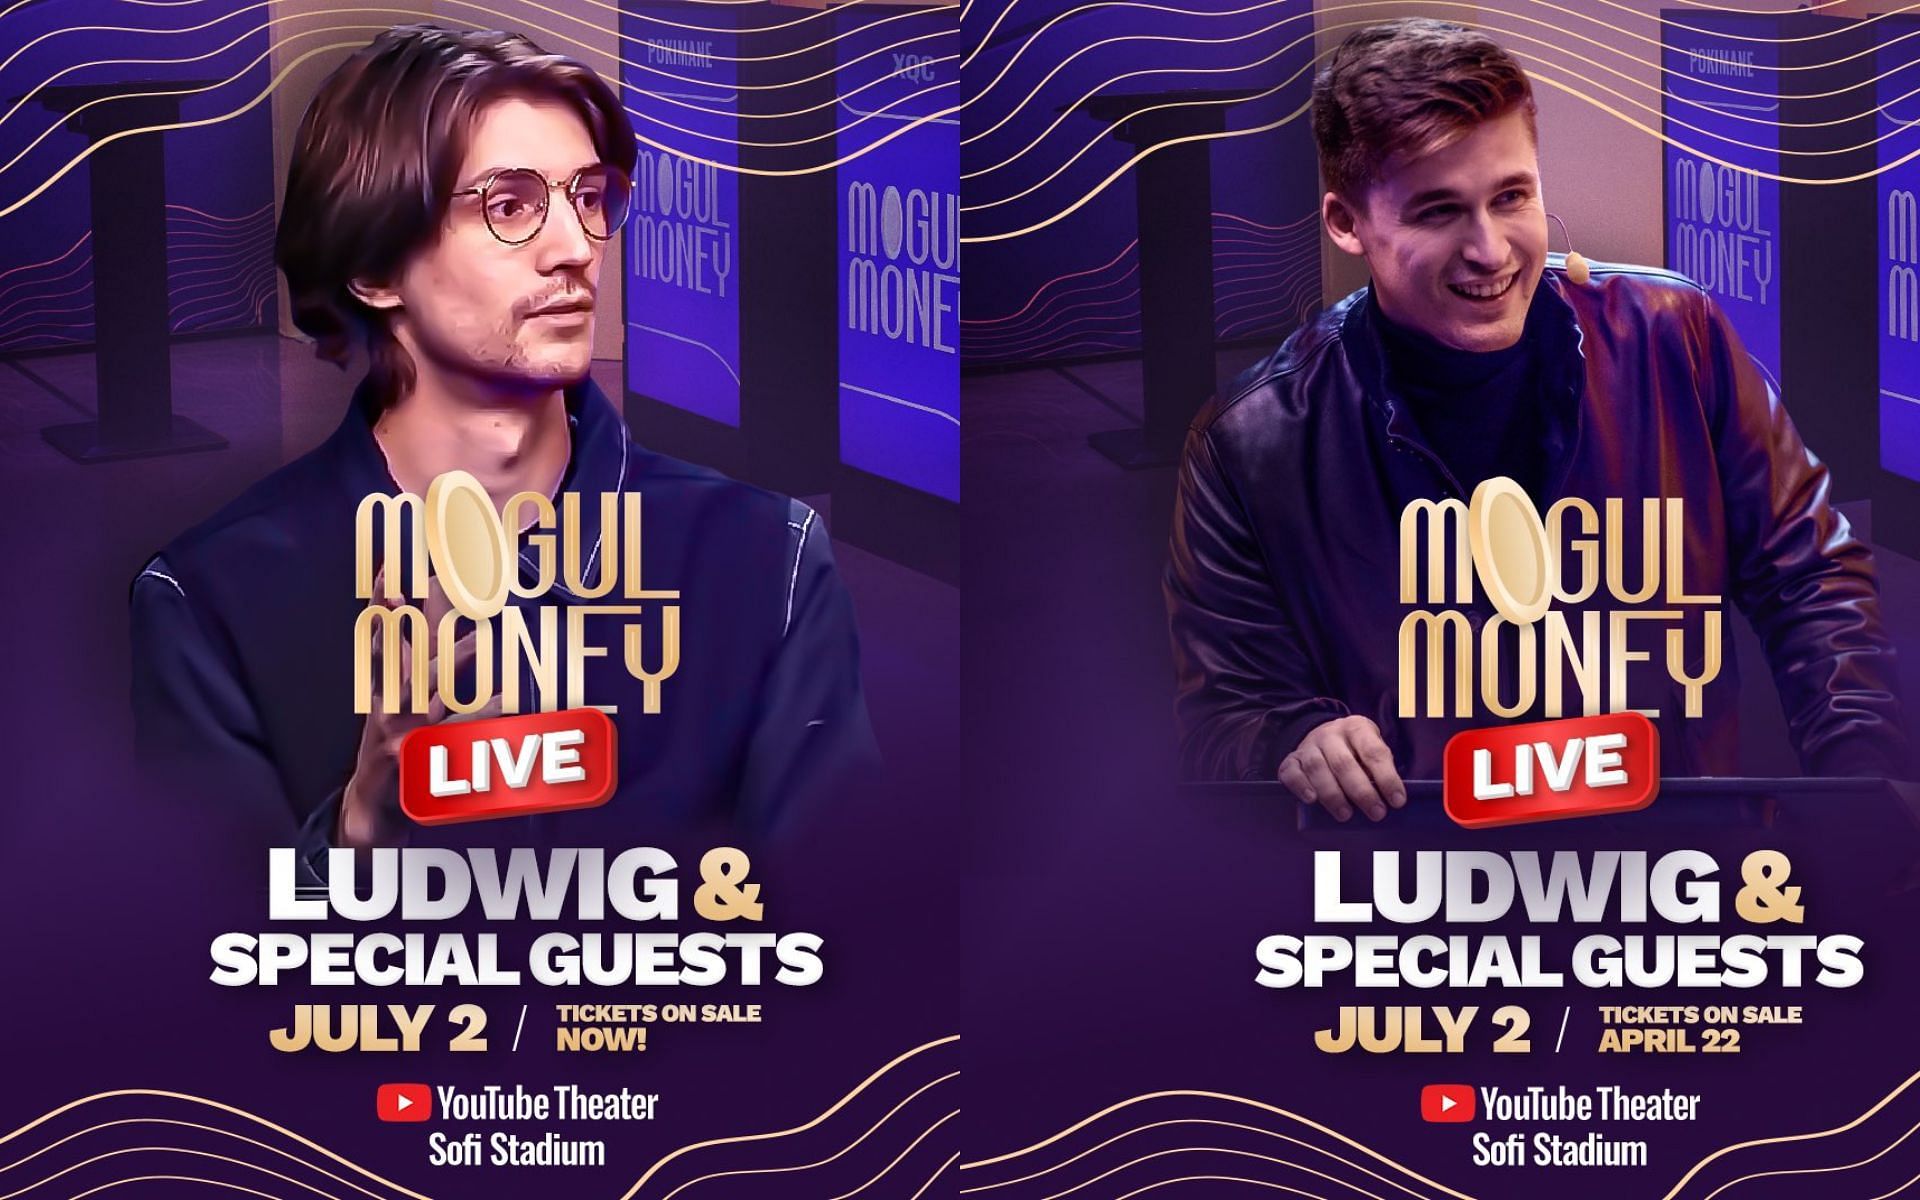 The final episode of Mogul Money Live will be broadcasted on July 6, 2022 (Images via LudwigAhgren/Twitter)